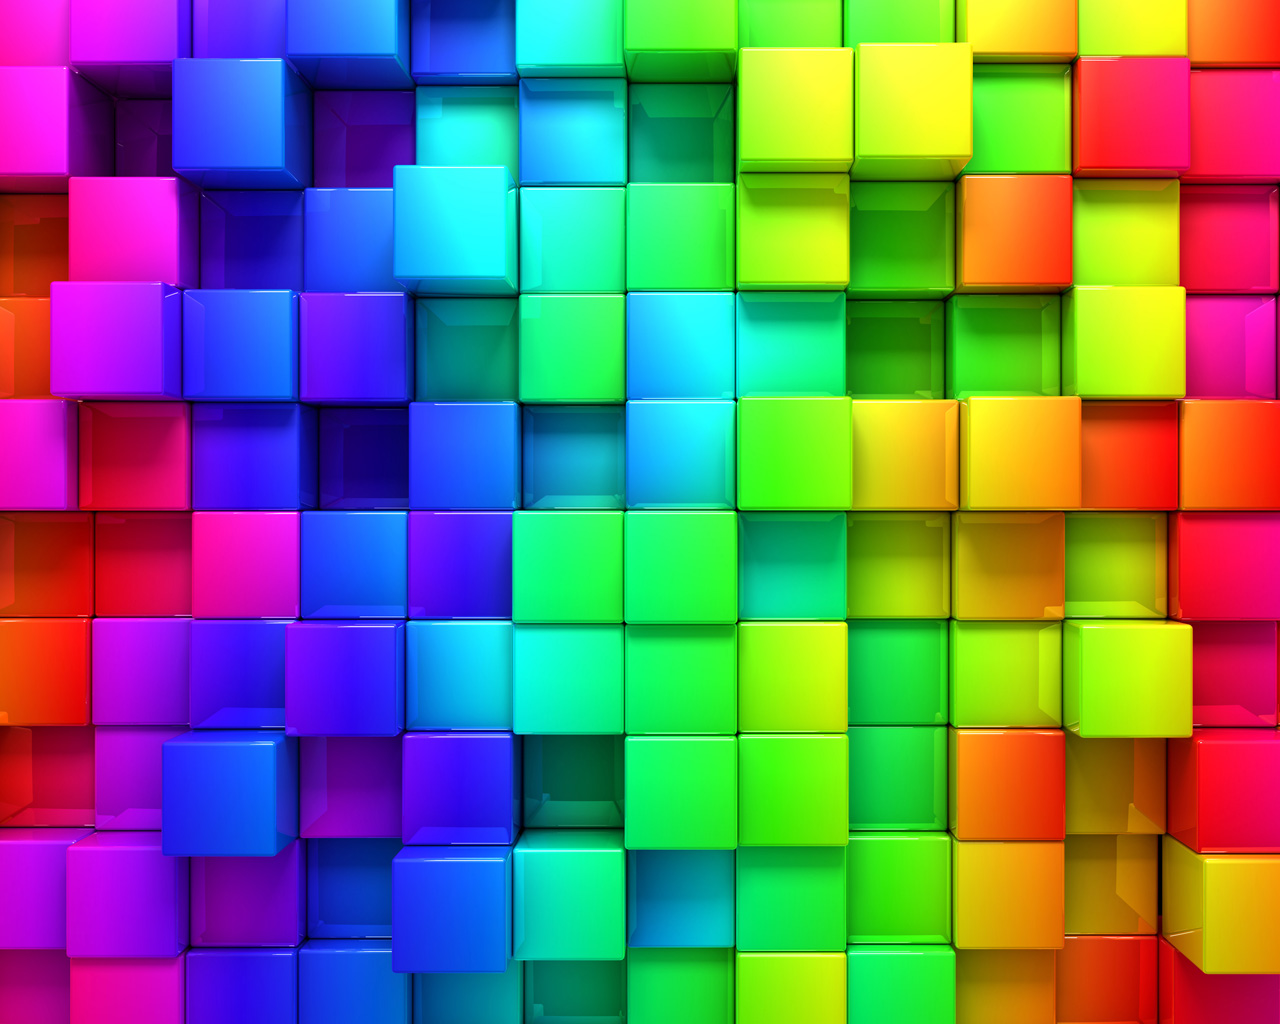 3d Colorful Cubes Backgrounds For PowerPoint